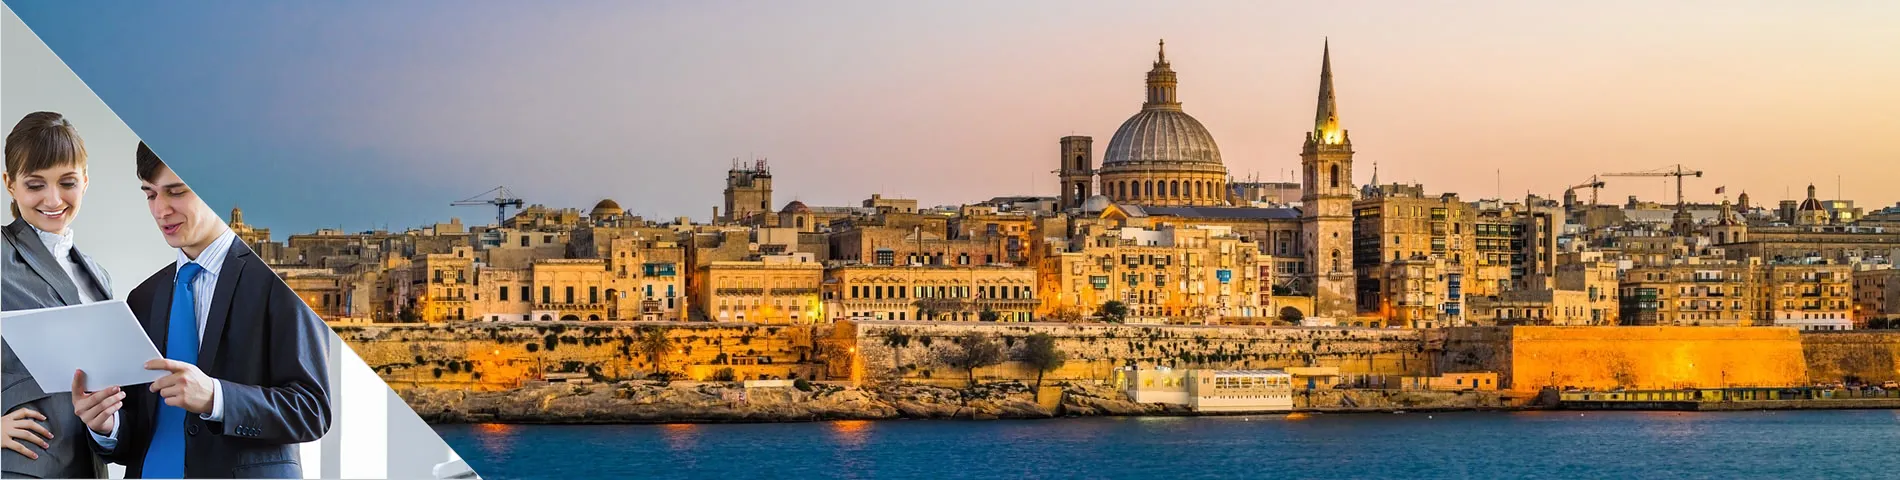 Sliema - Business One-to-One